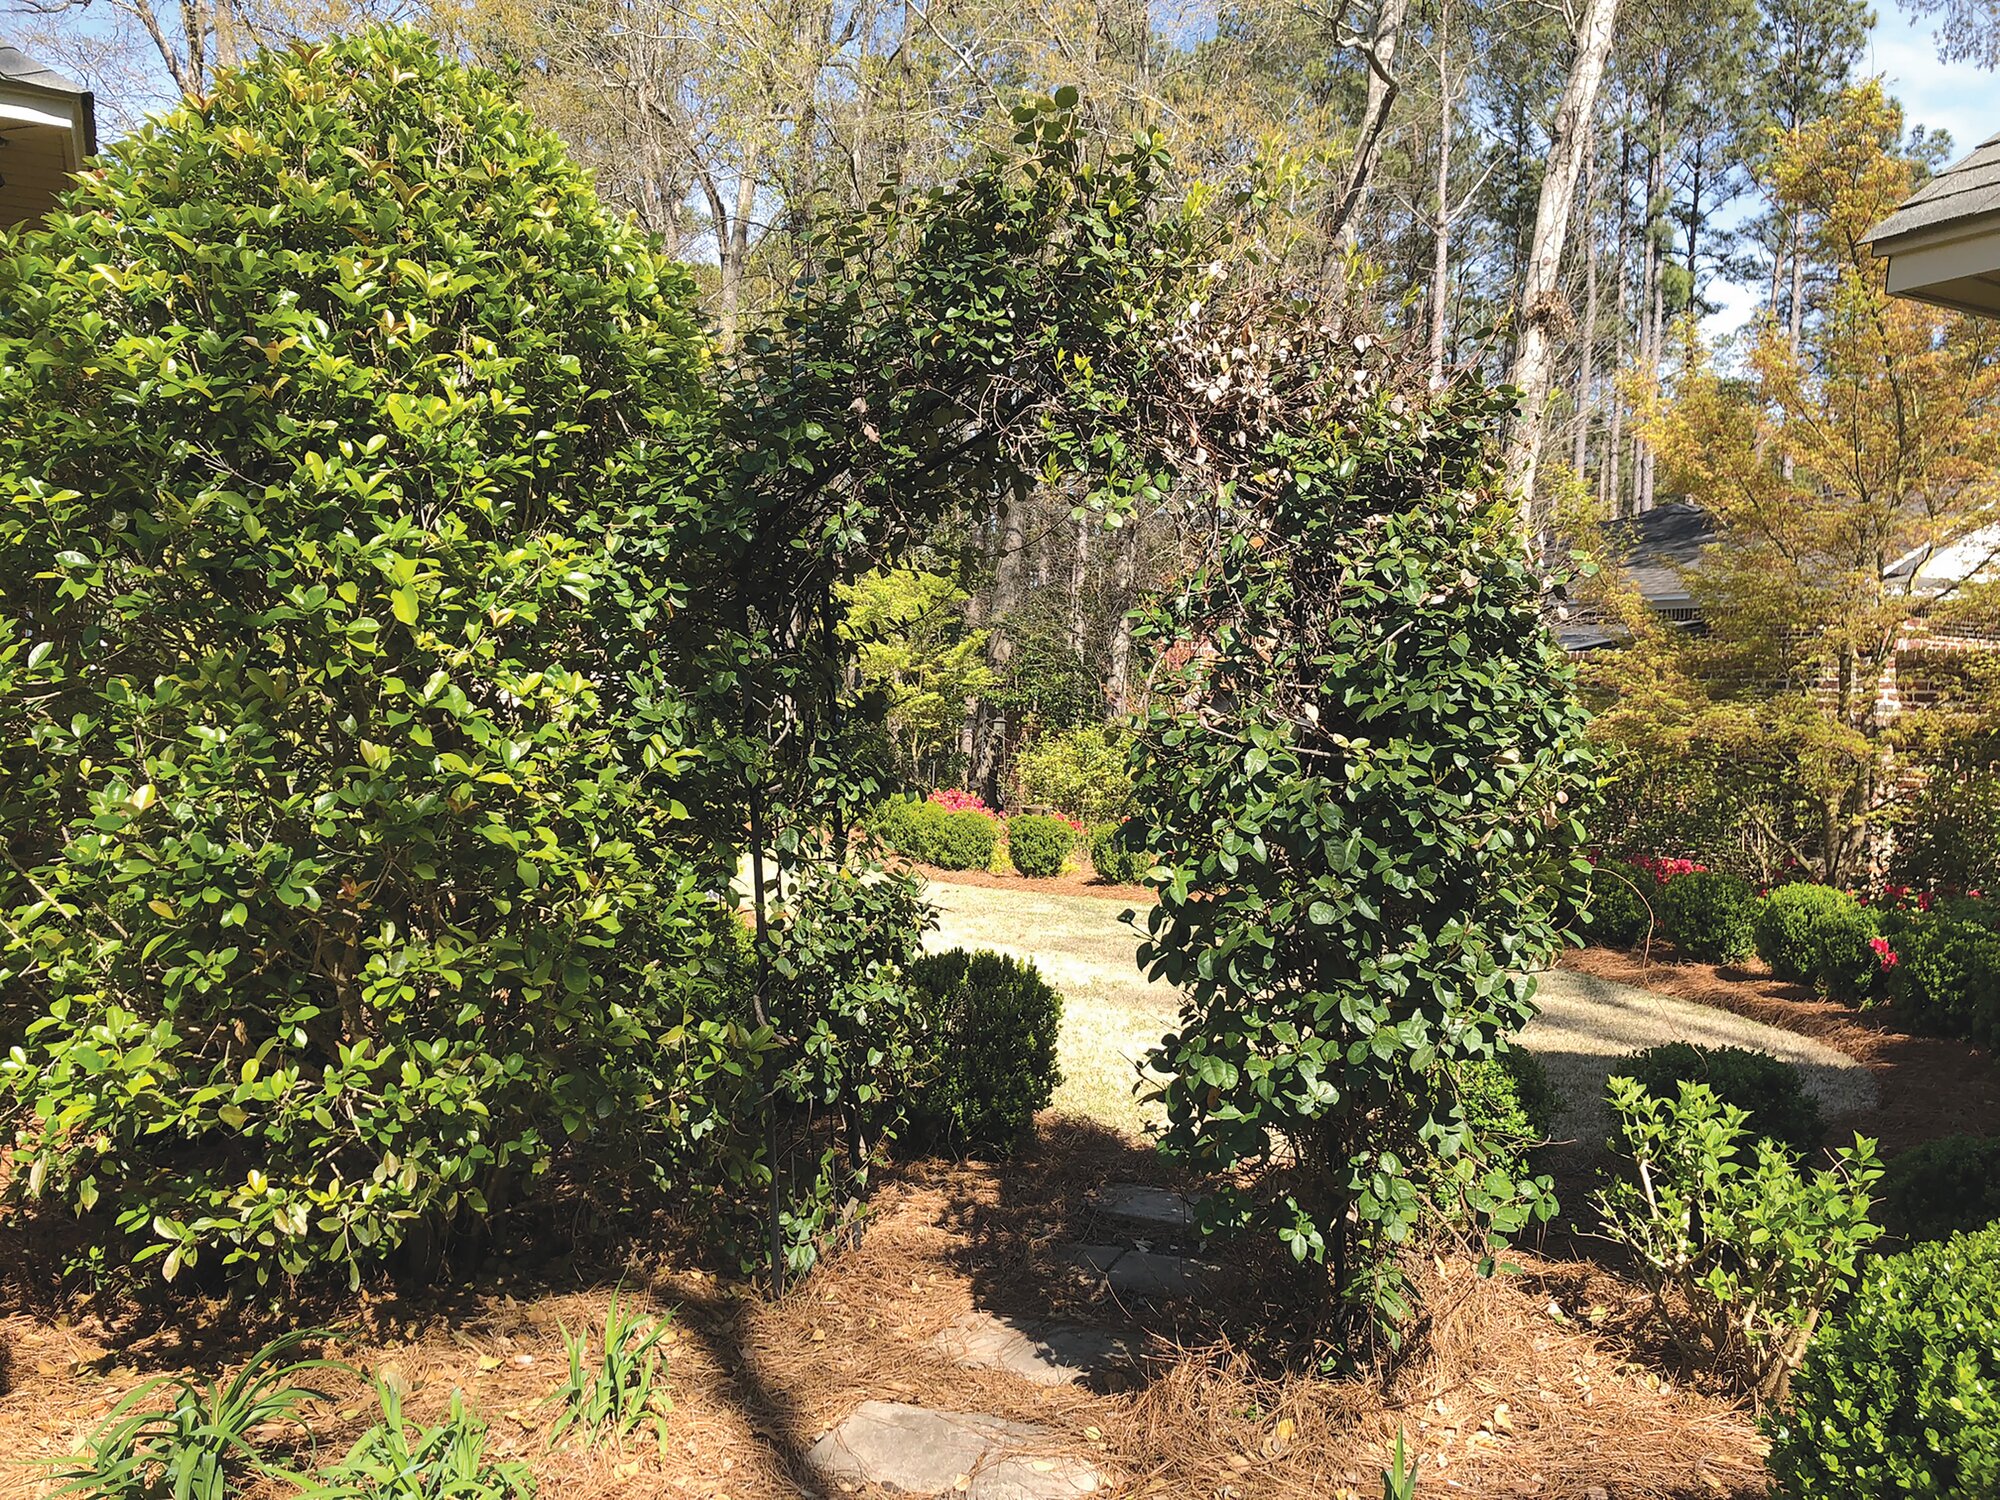 The owners of the first garden on the annual Sumter Spring Garden Tour have maximized each space in their garden with neat beds, a pergola, climbing roses on a brick fence and more.